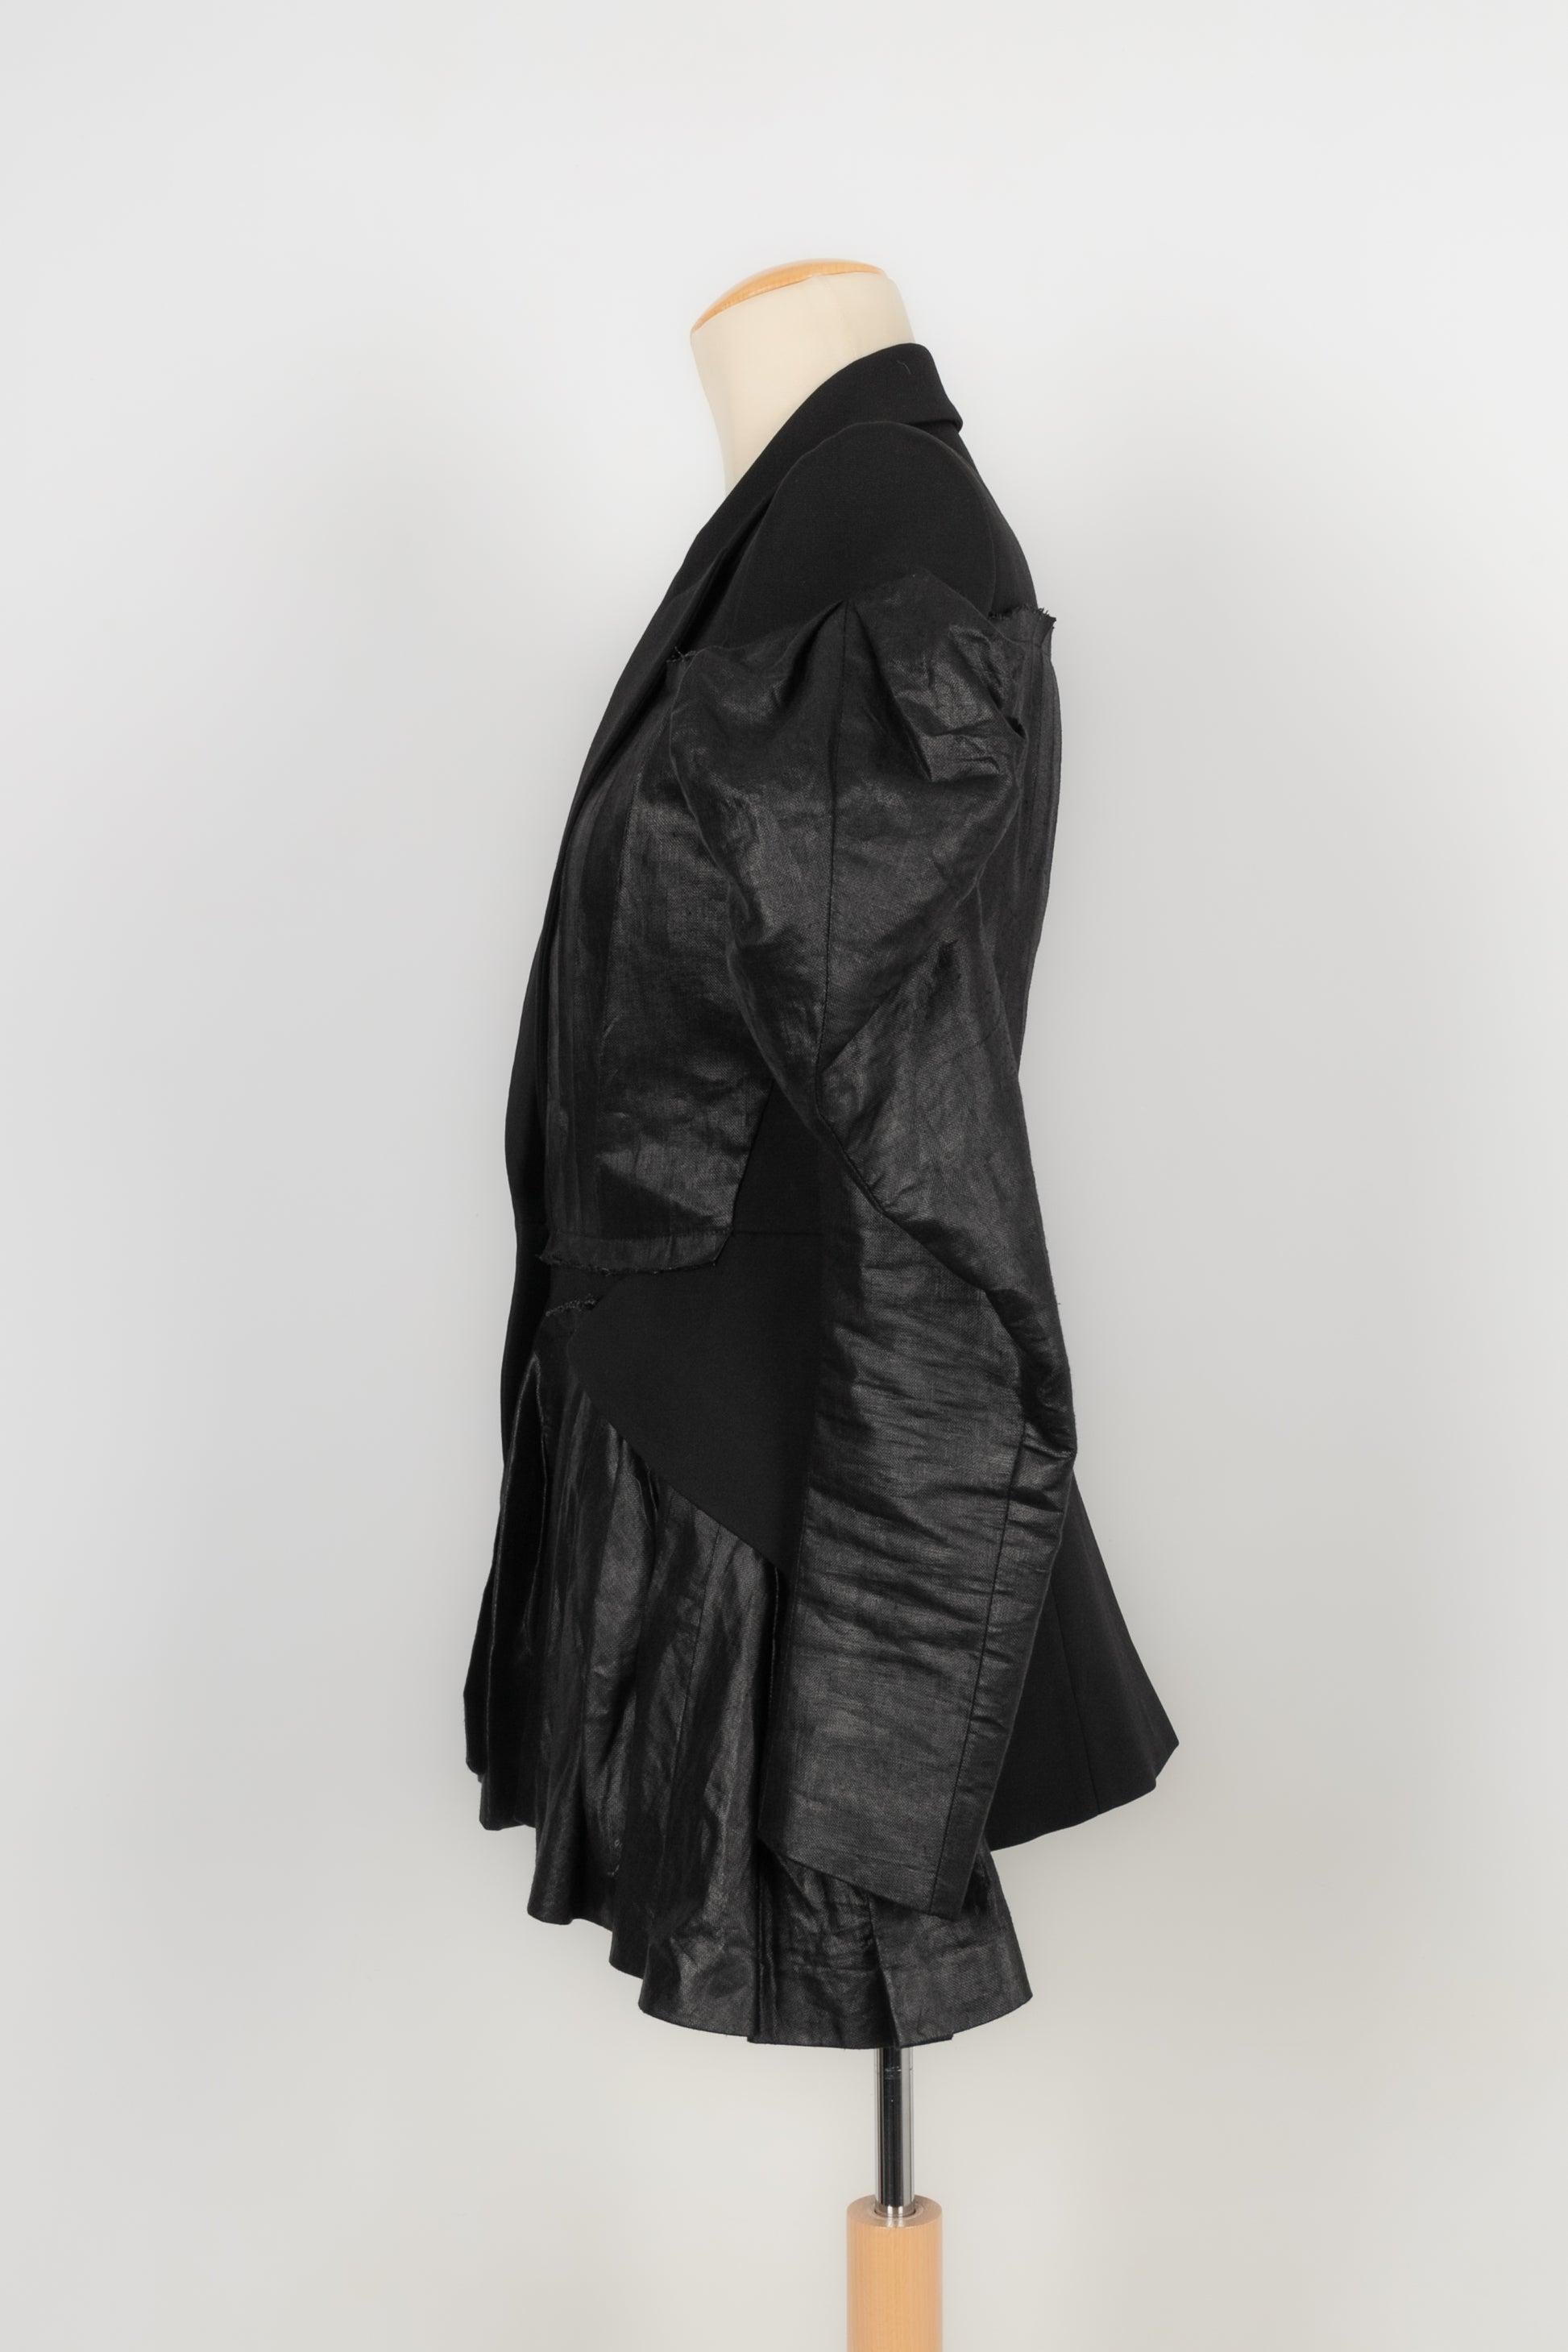 Alexander Mc Queen - (Made in Italy) Blended silk and wool jacket with black linen sleeves. Indicated size 38IT, it fits a 36FR. Spring-Summer 2020 Ready-to-Wear Collection under the artistic direction of Sarah Burton.

Additional